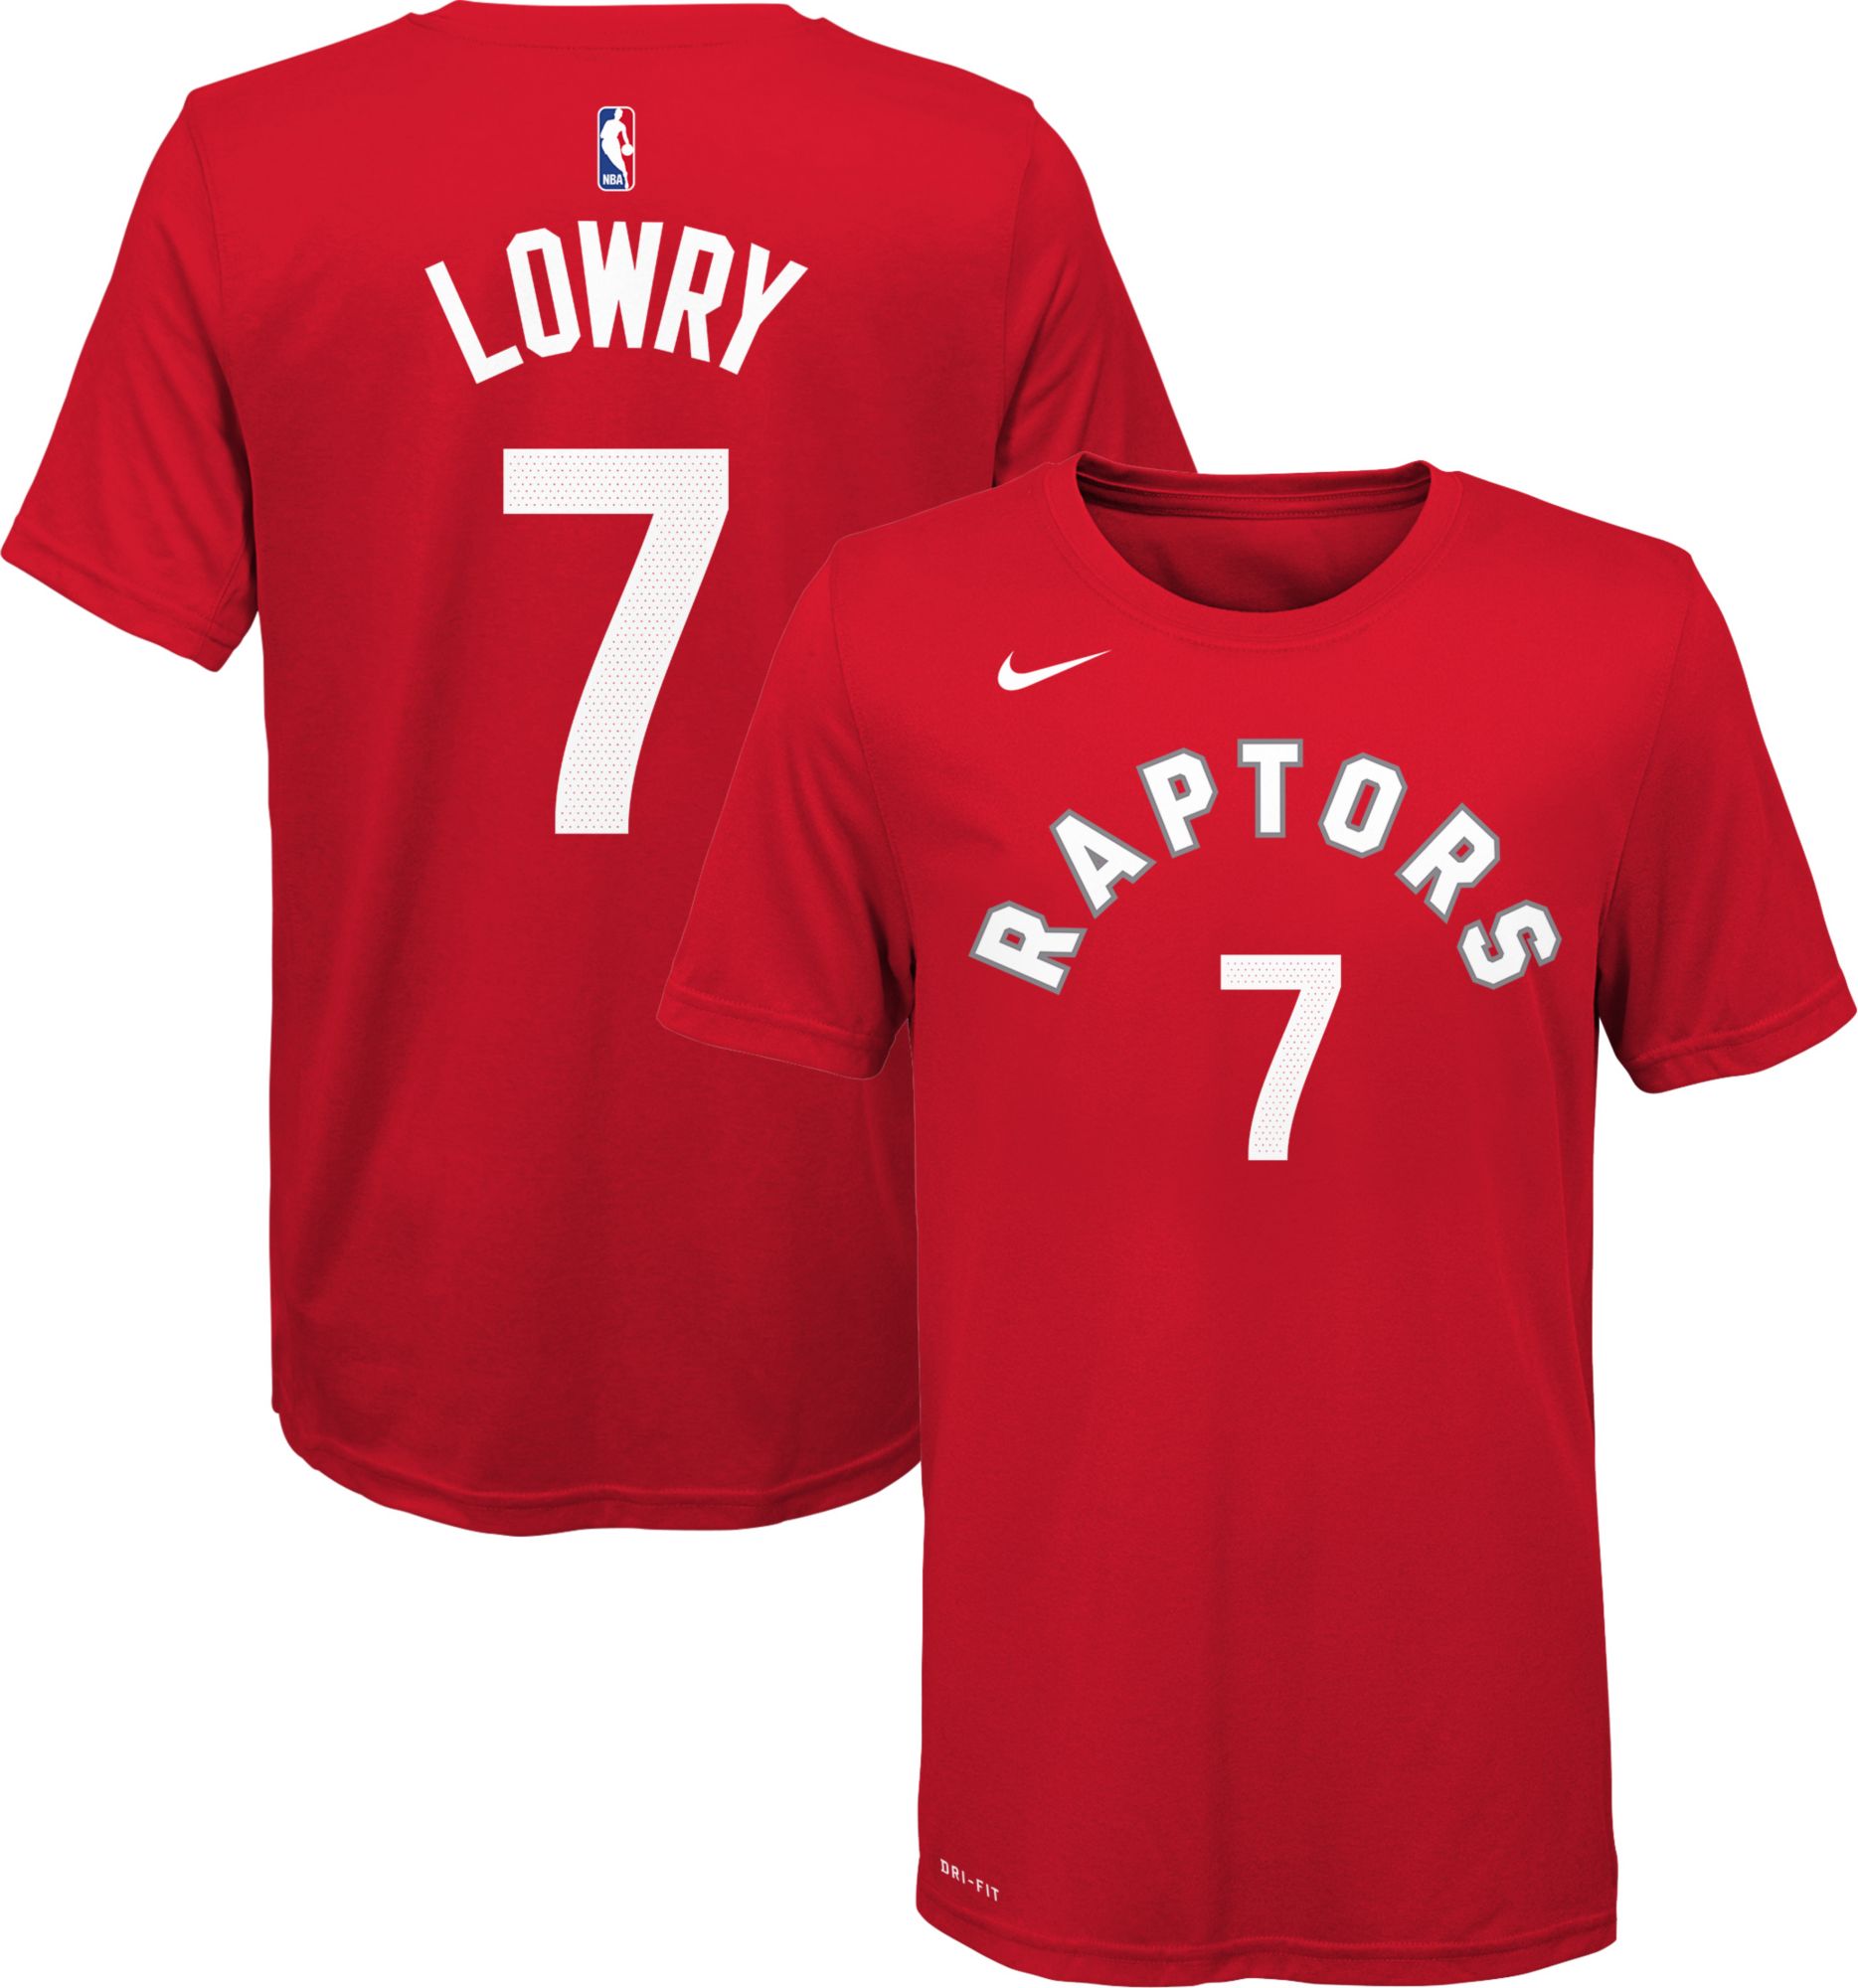 lowry youth jersey